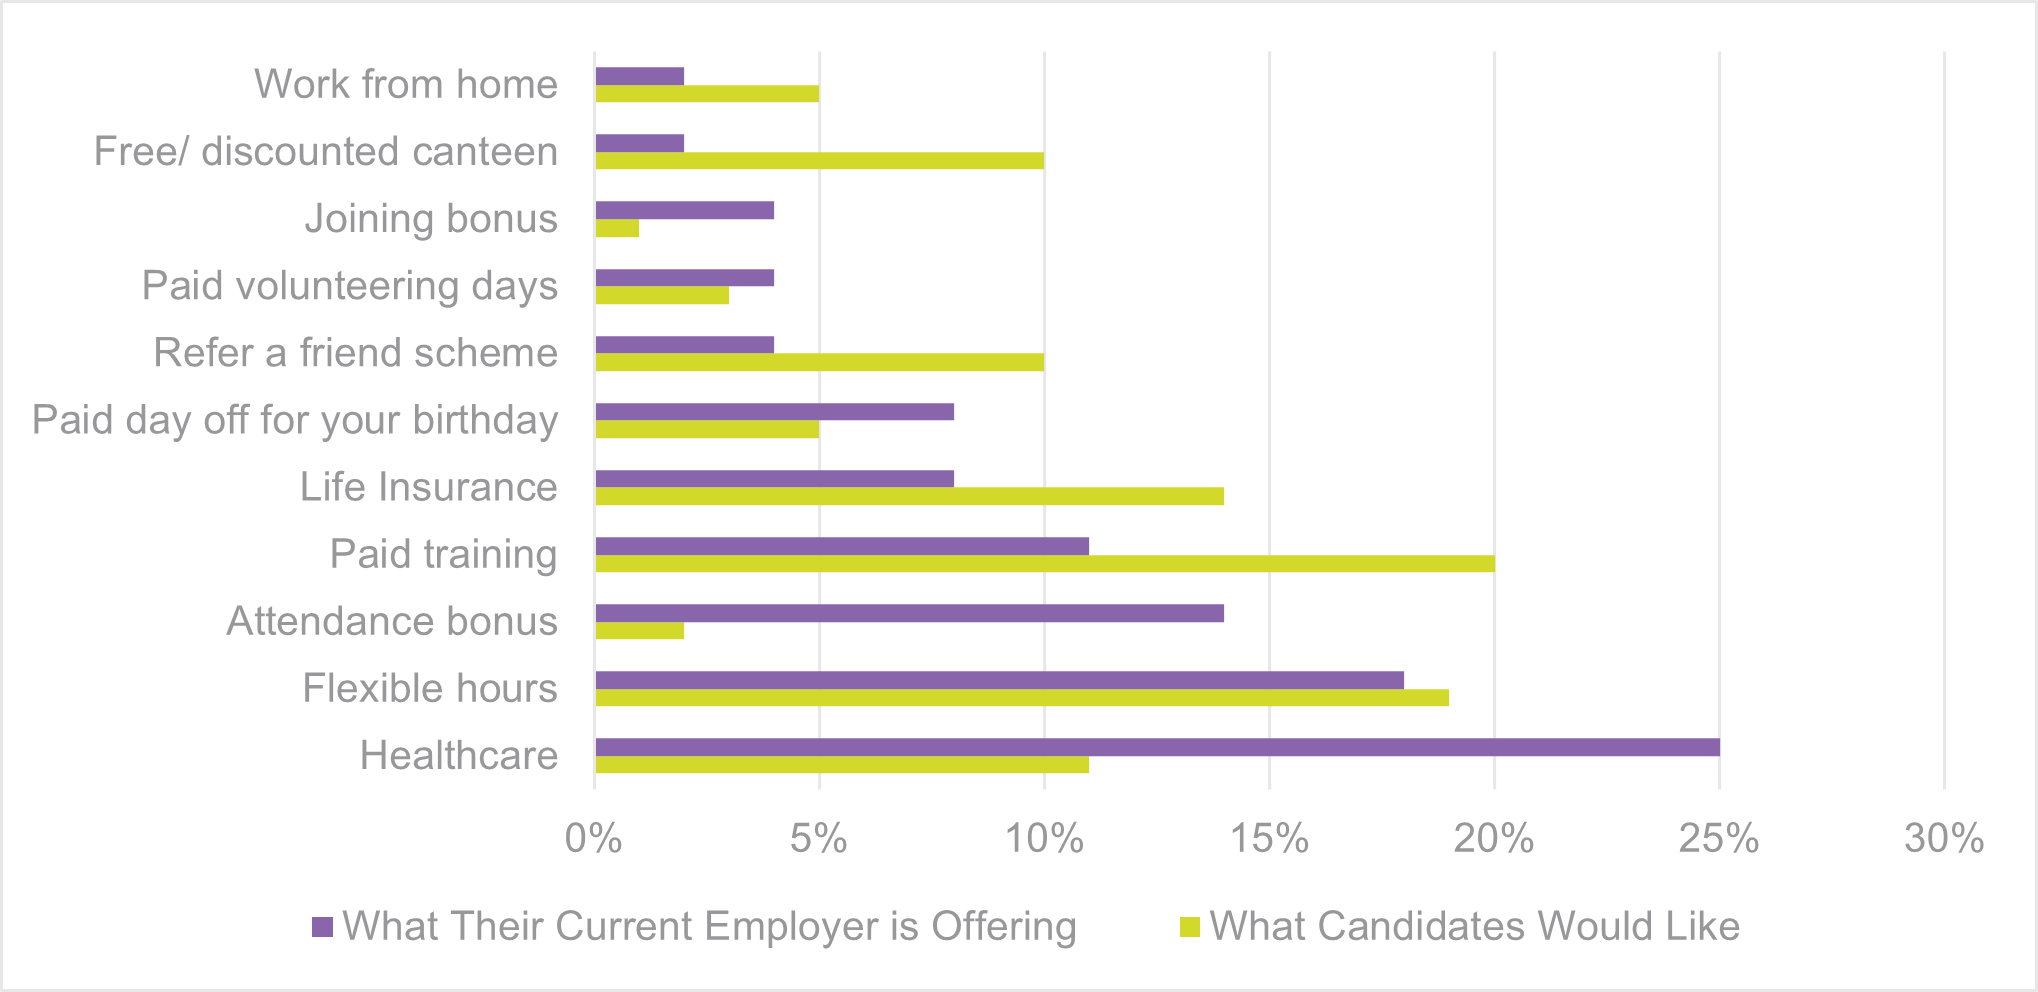 Thorn Baker Group Skills Shortage: What Are Candidates Really Looking For?